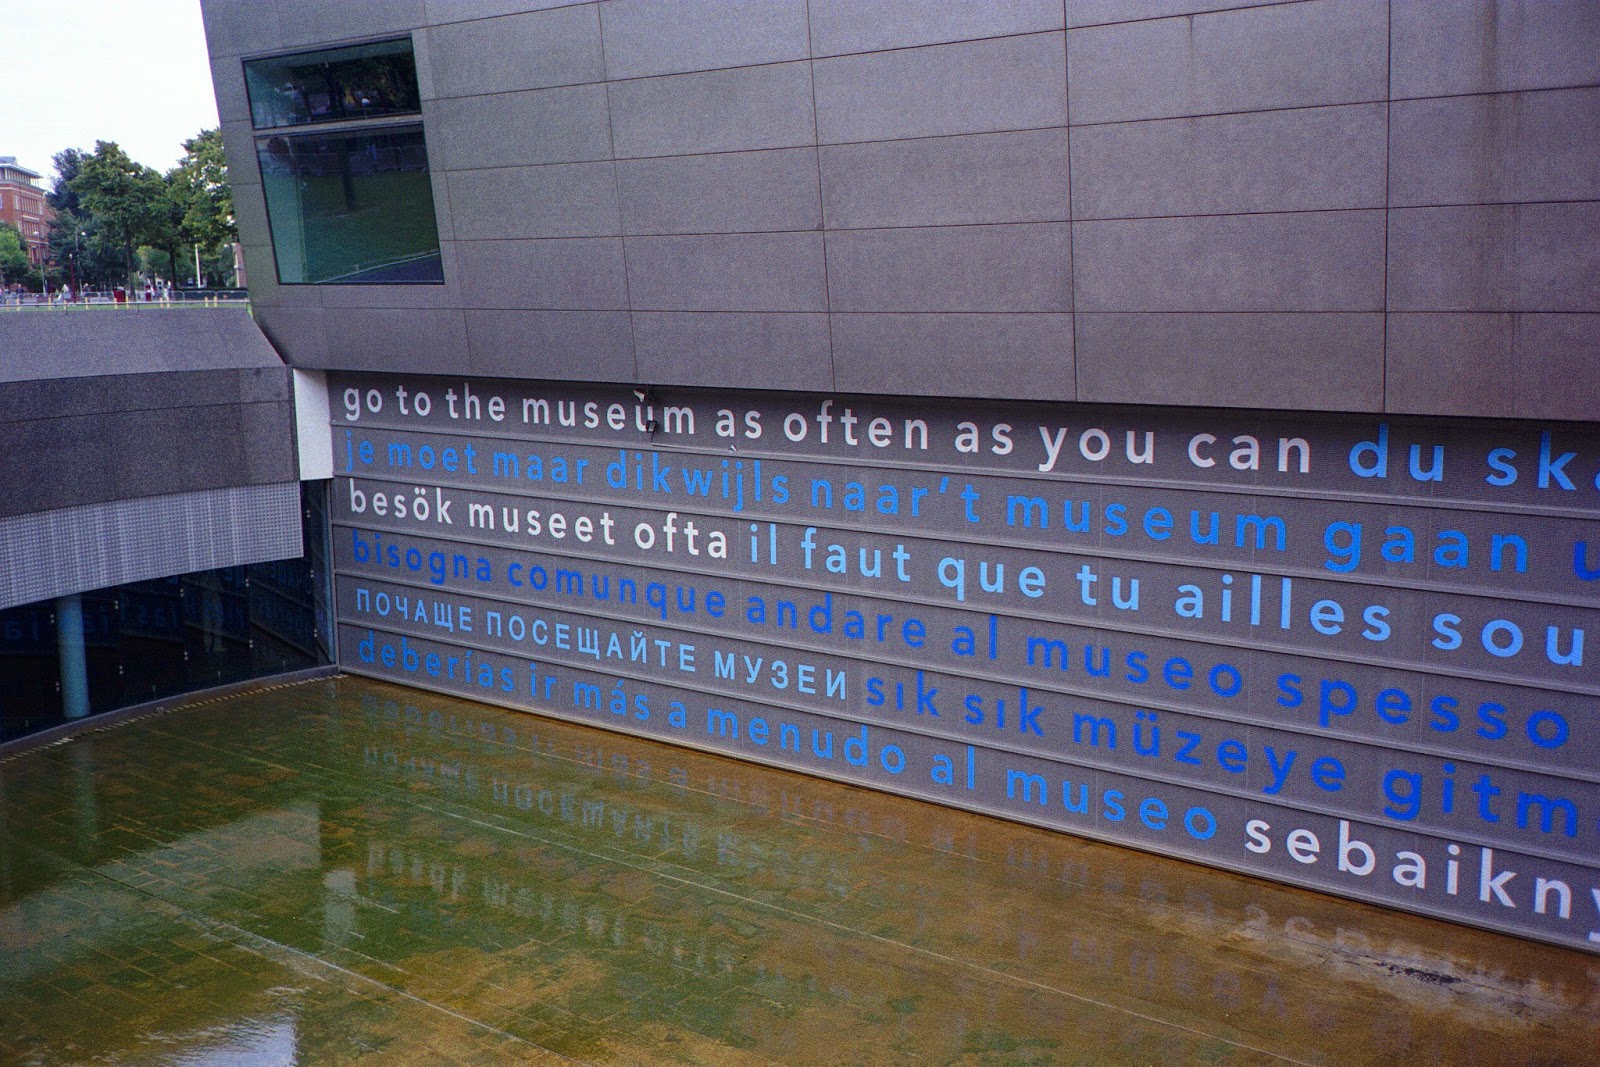 Water feature and art work at the Van Gogh Museum, Amsterdam